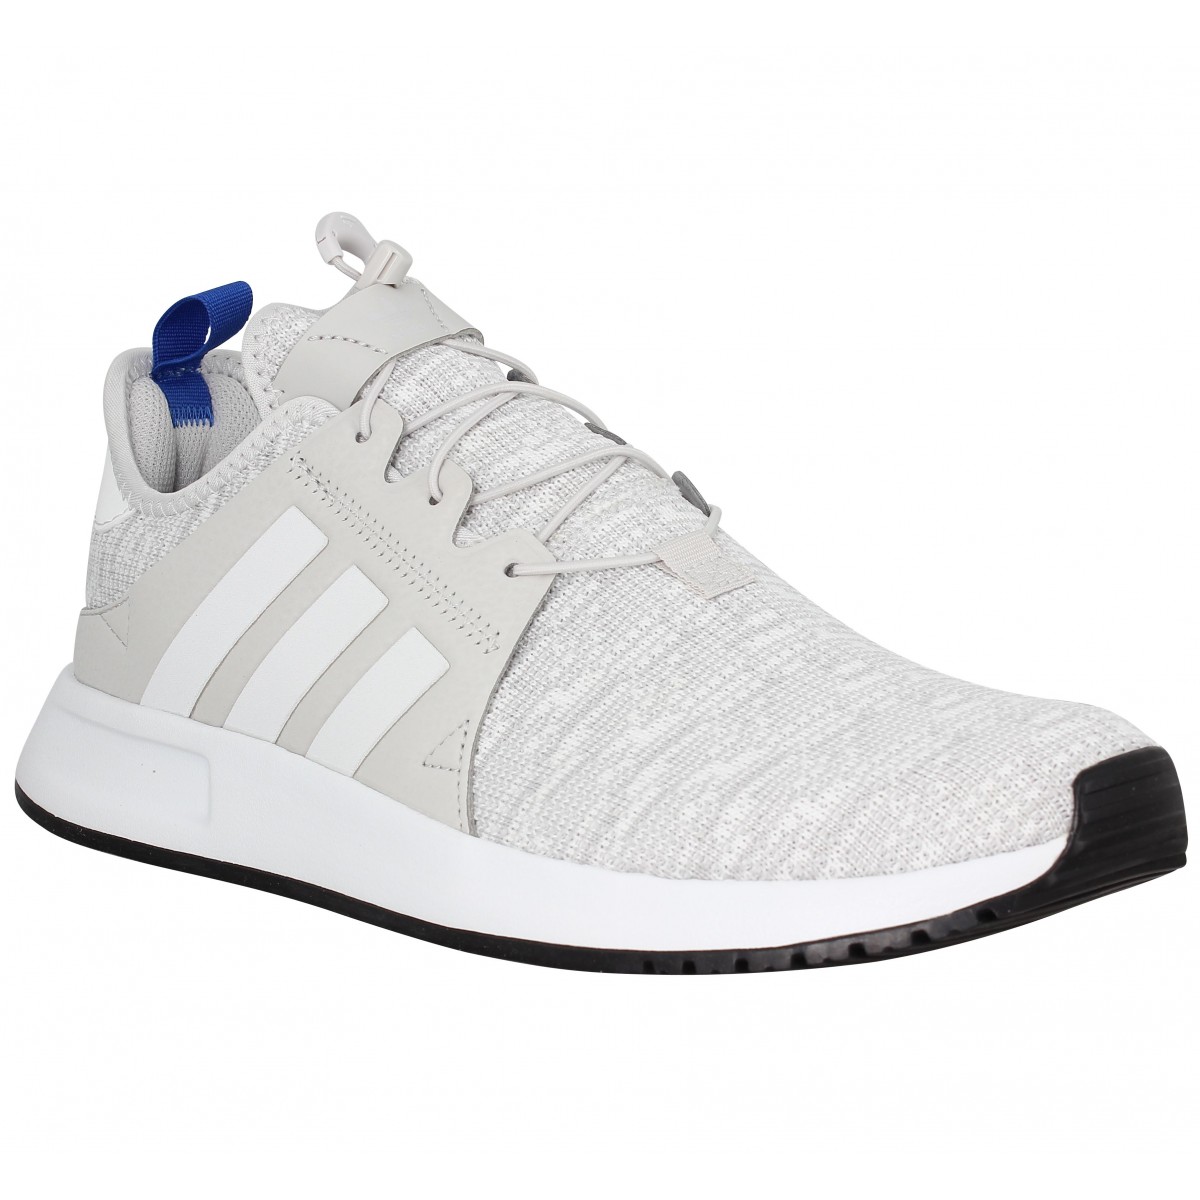 adidas homme chaussures toile